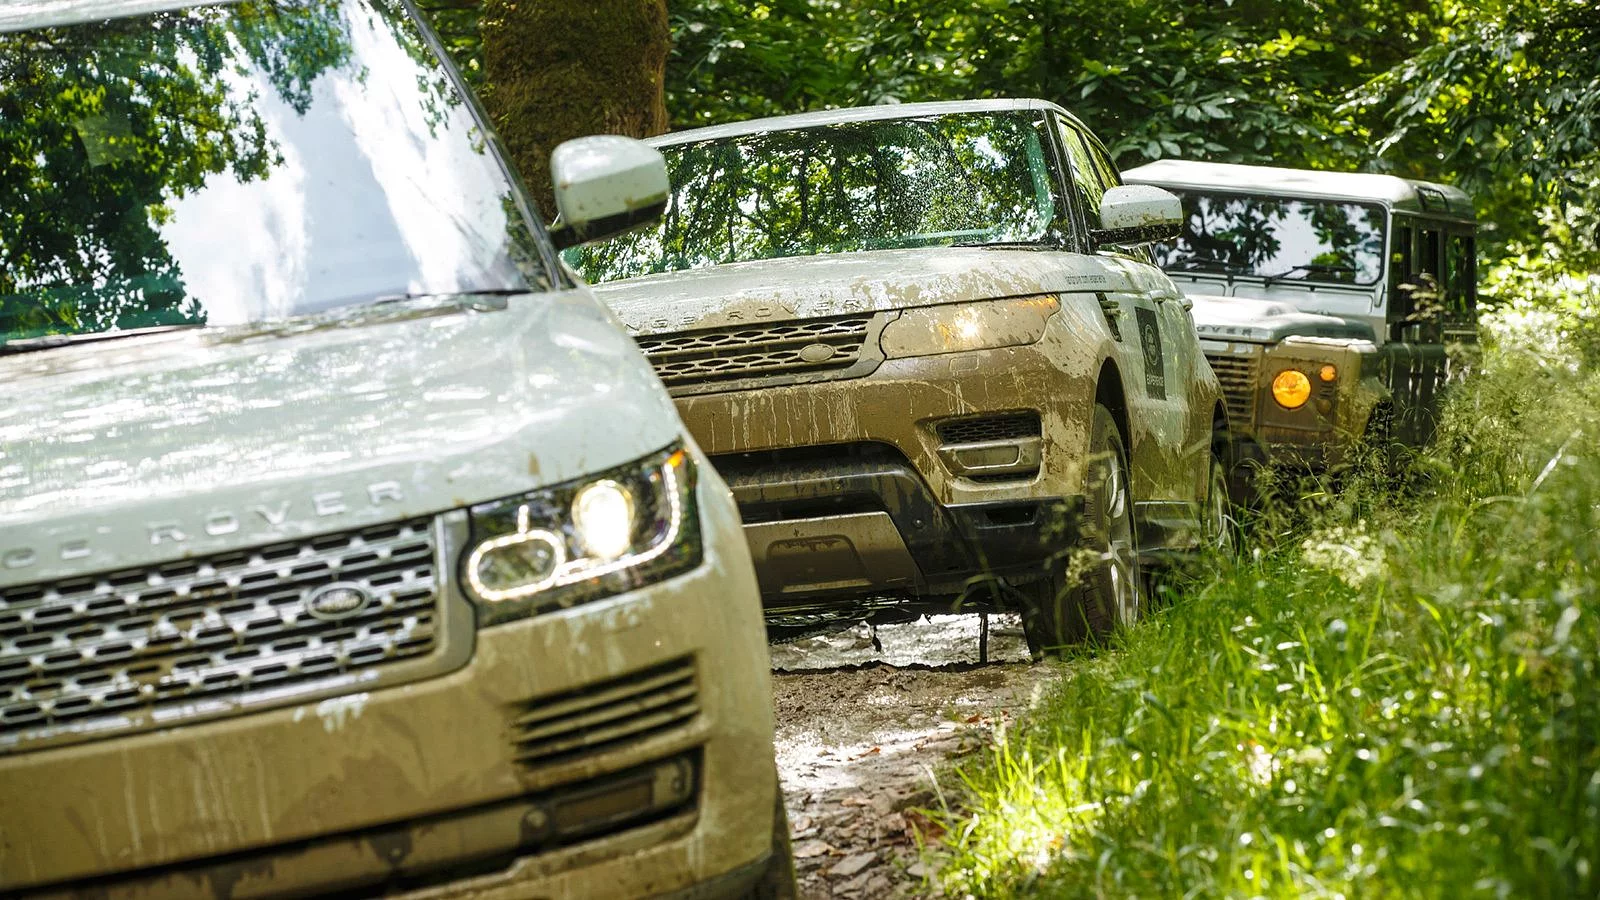 LAND ROVER EXPERIENCE DRIVES